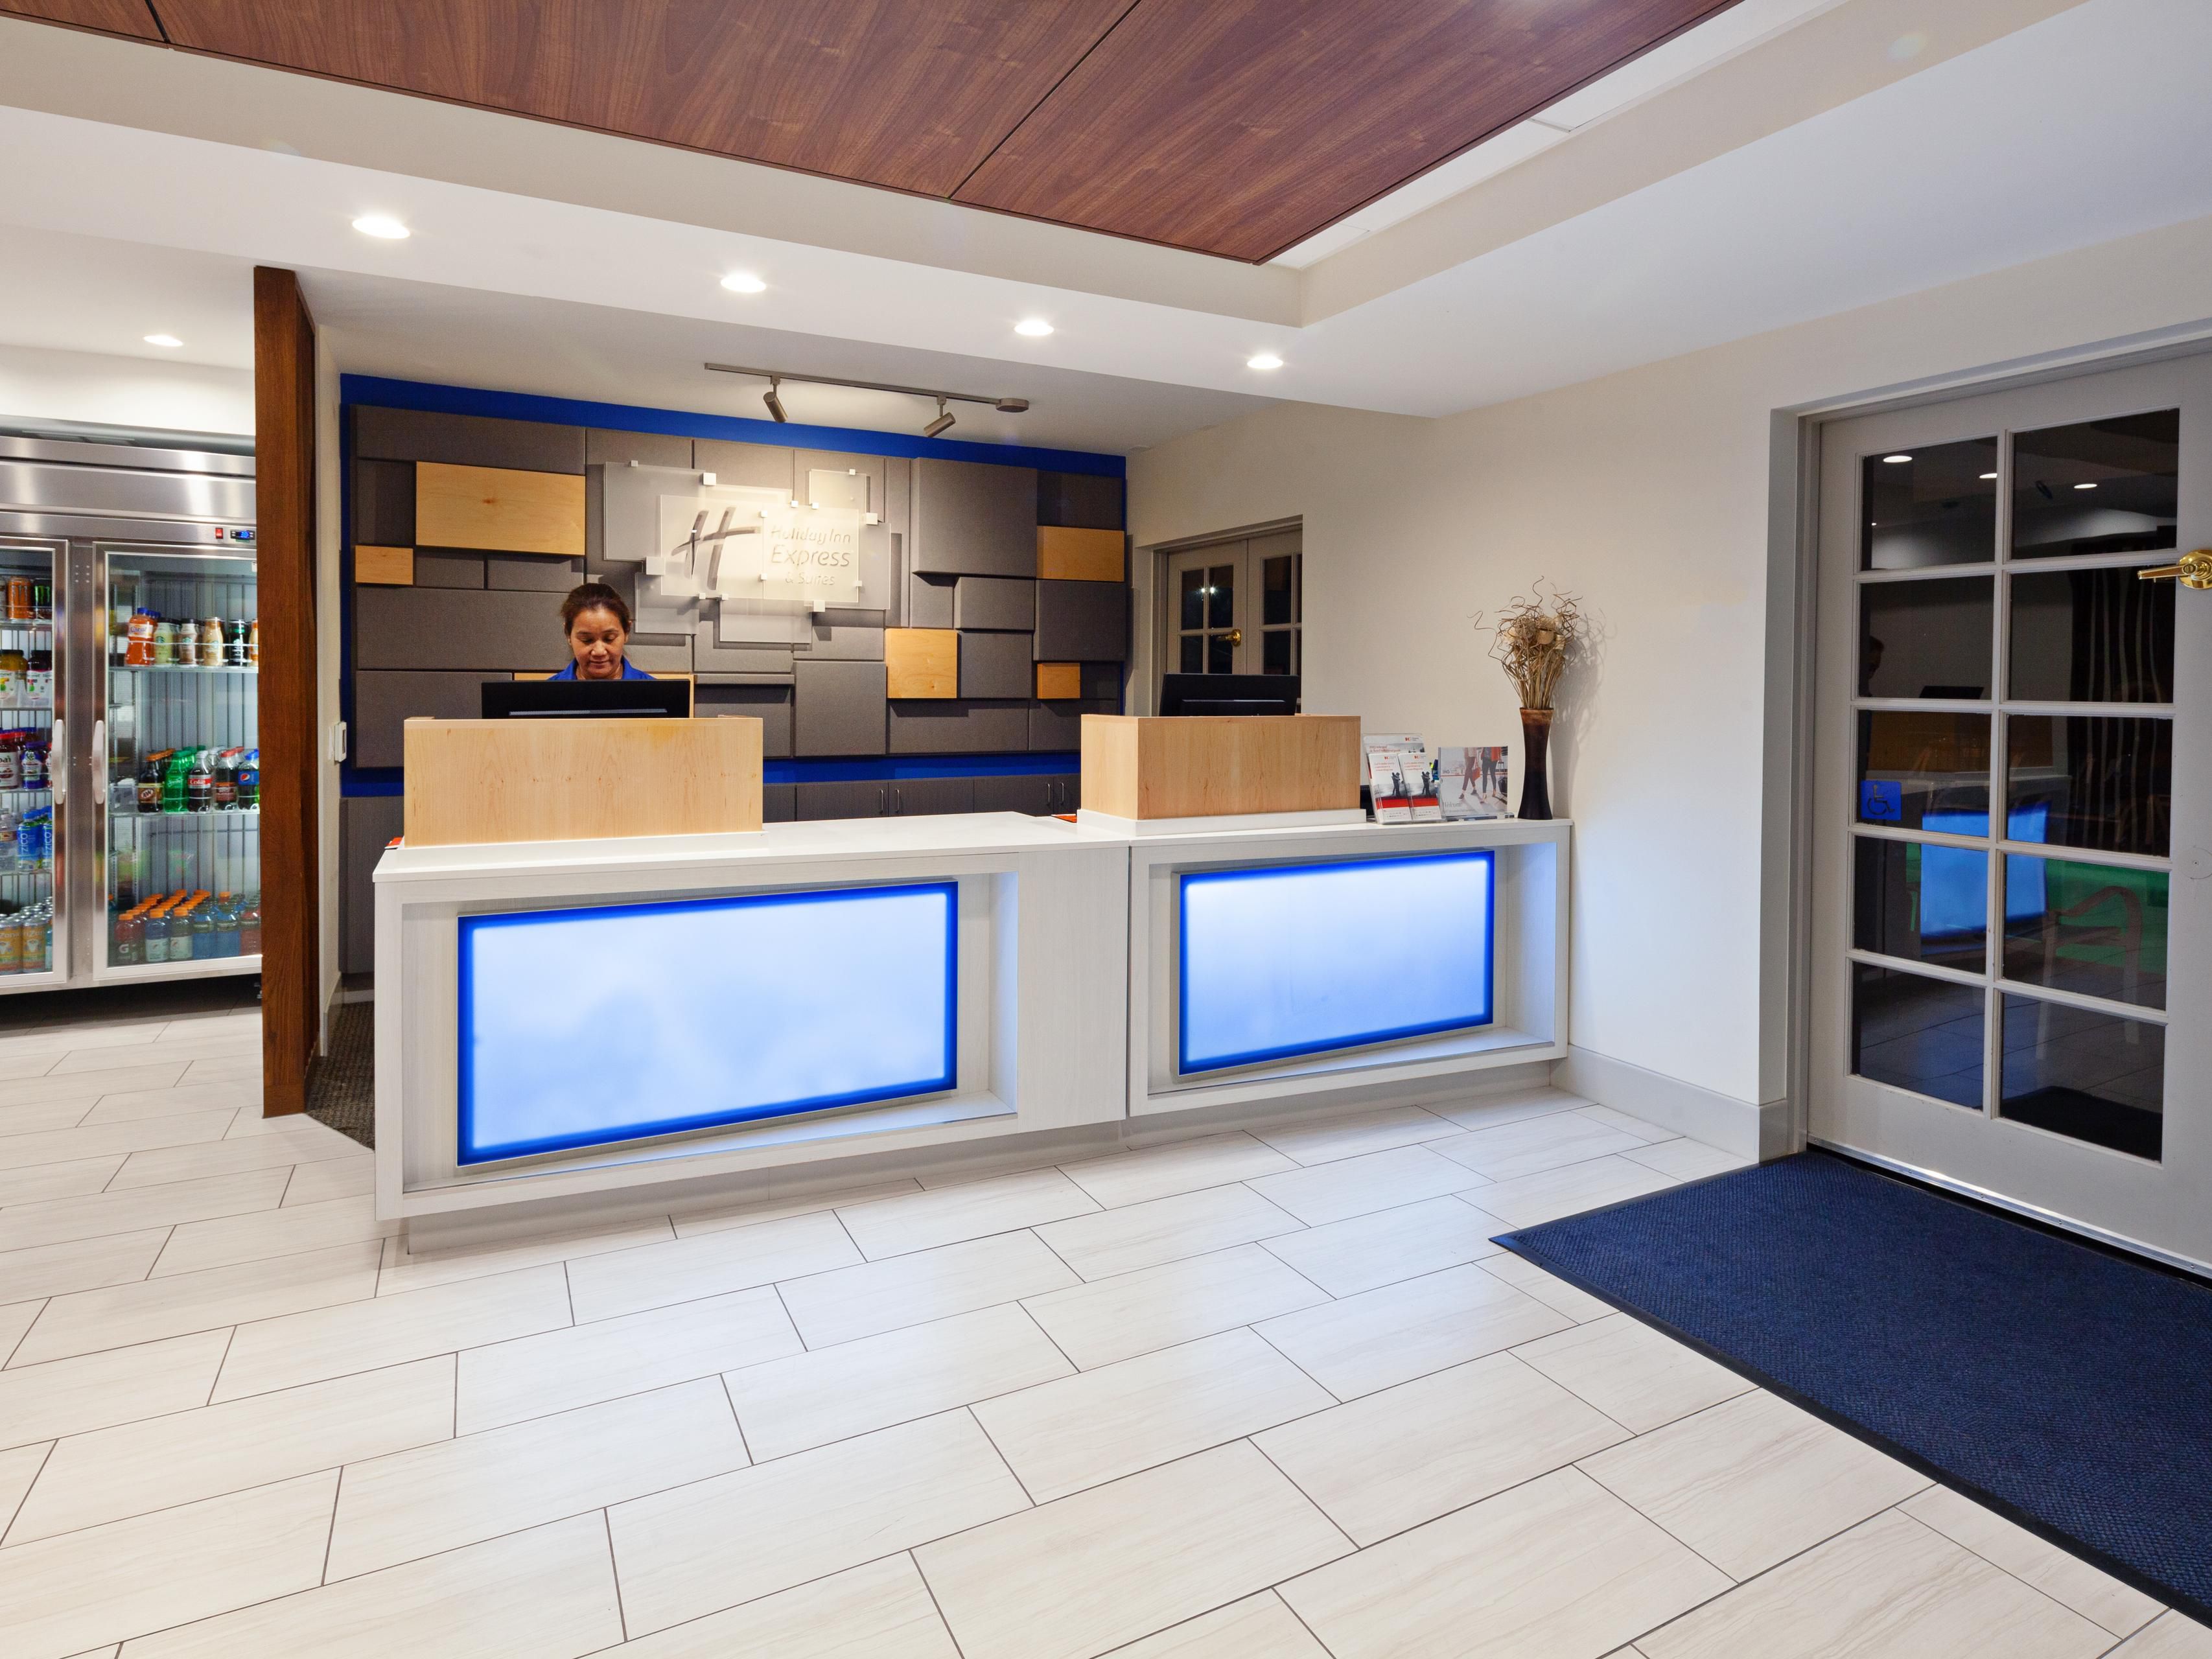 Candlewood Suites San Diego Hotels With Kitchens